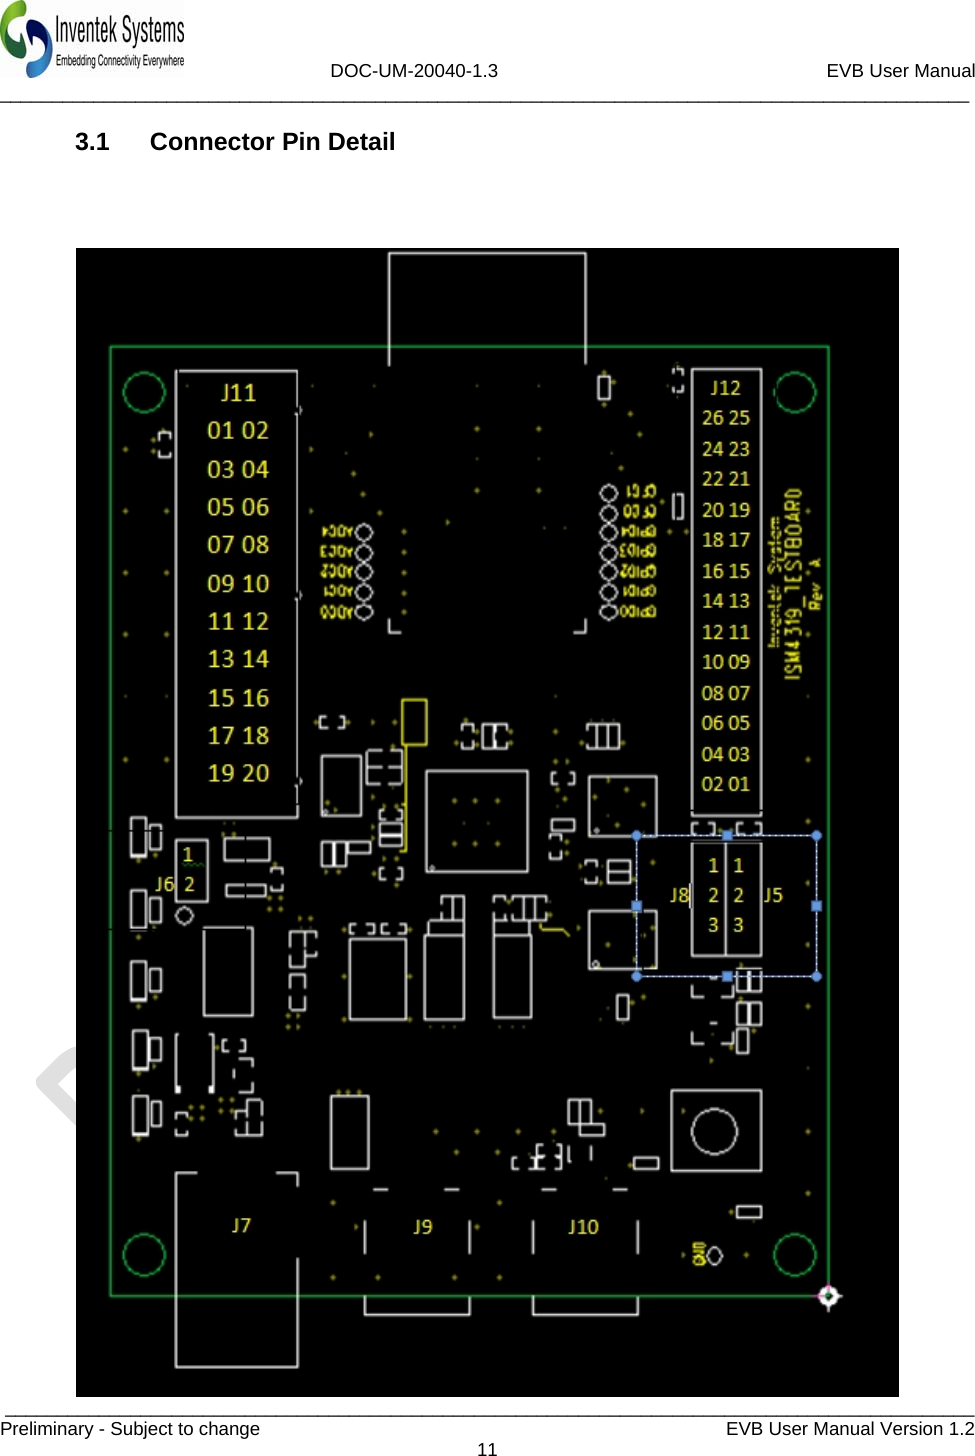                             DOC-UM-20040-1.3                                                         EVB User Manual  _____________________________________________________________________________________________  _____________________________________________________________________________________________Preliminary - Subject to change   EVB User Manual Version 1.2  11  3.1  Connector Pin Detail                 